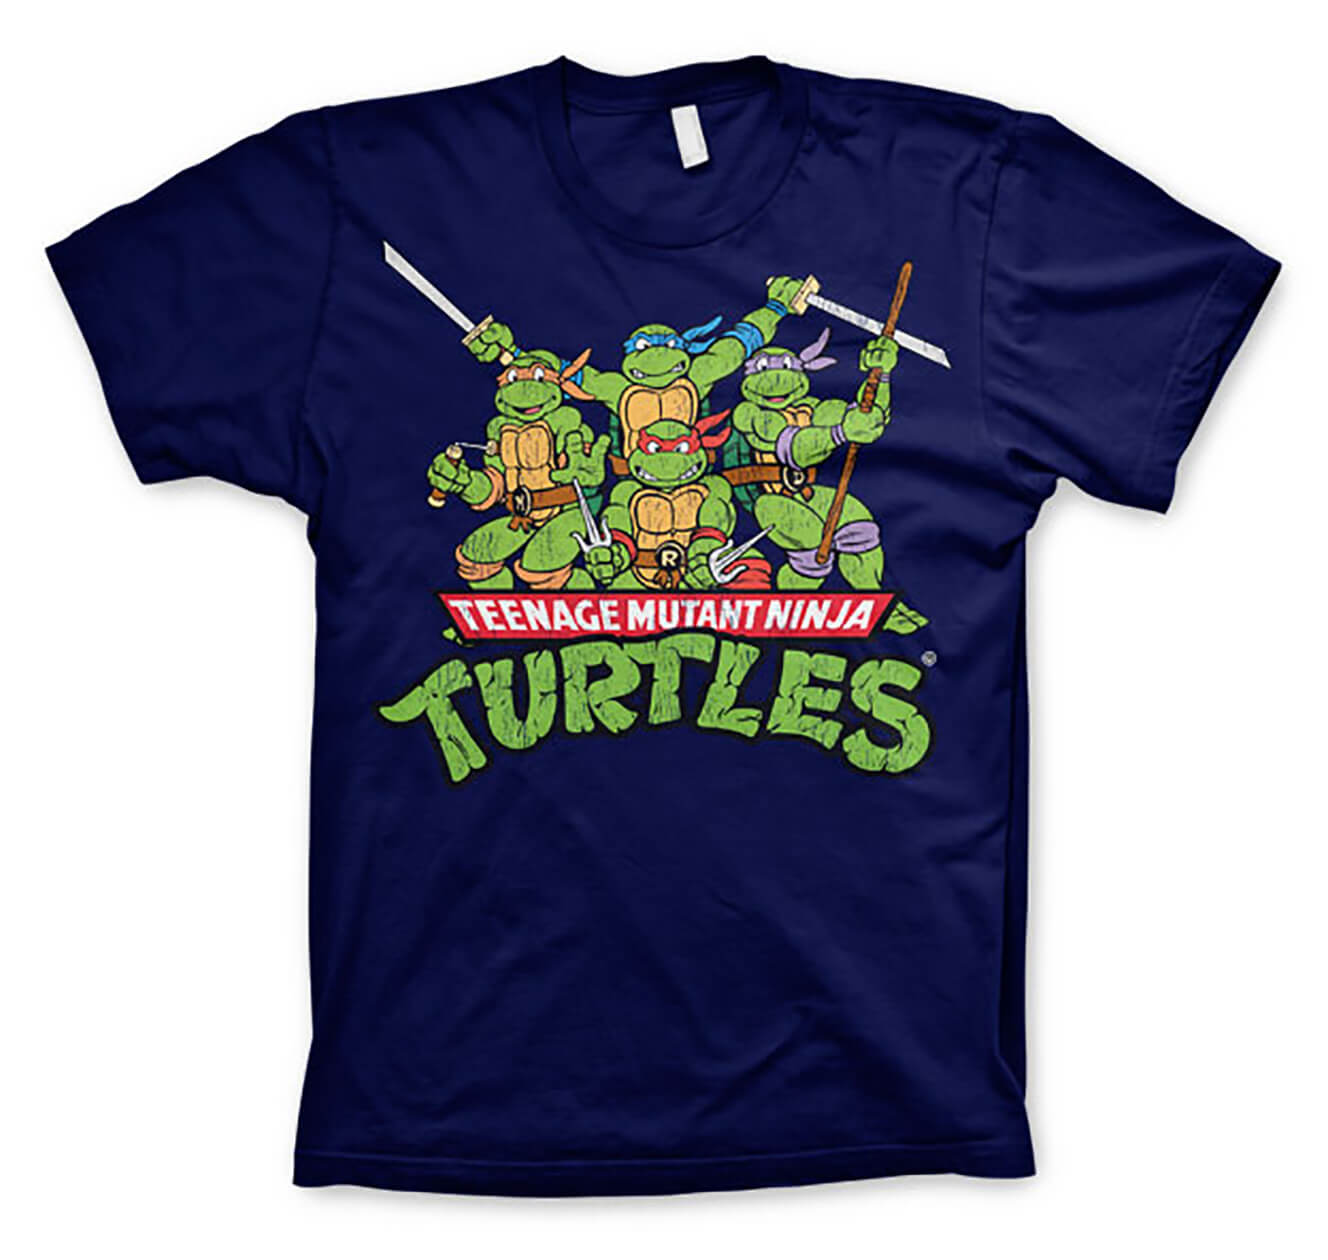 Turtles Distressed Group T-shirt